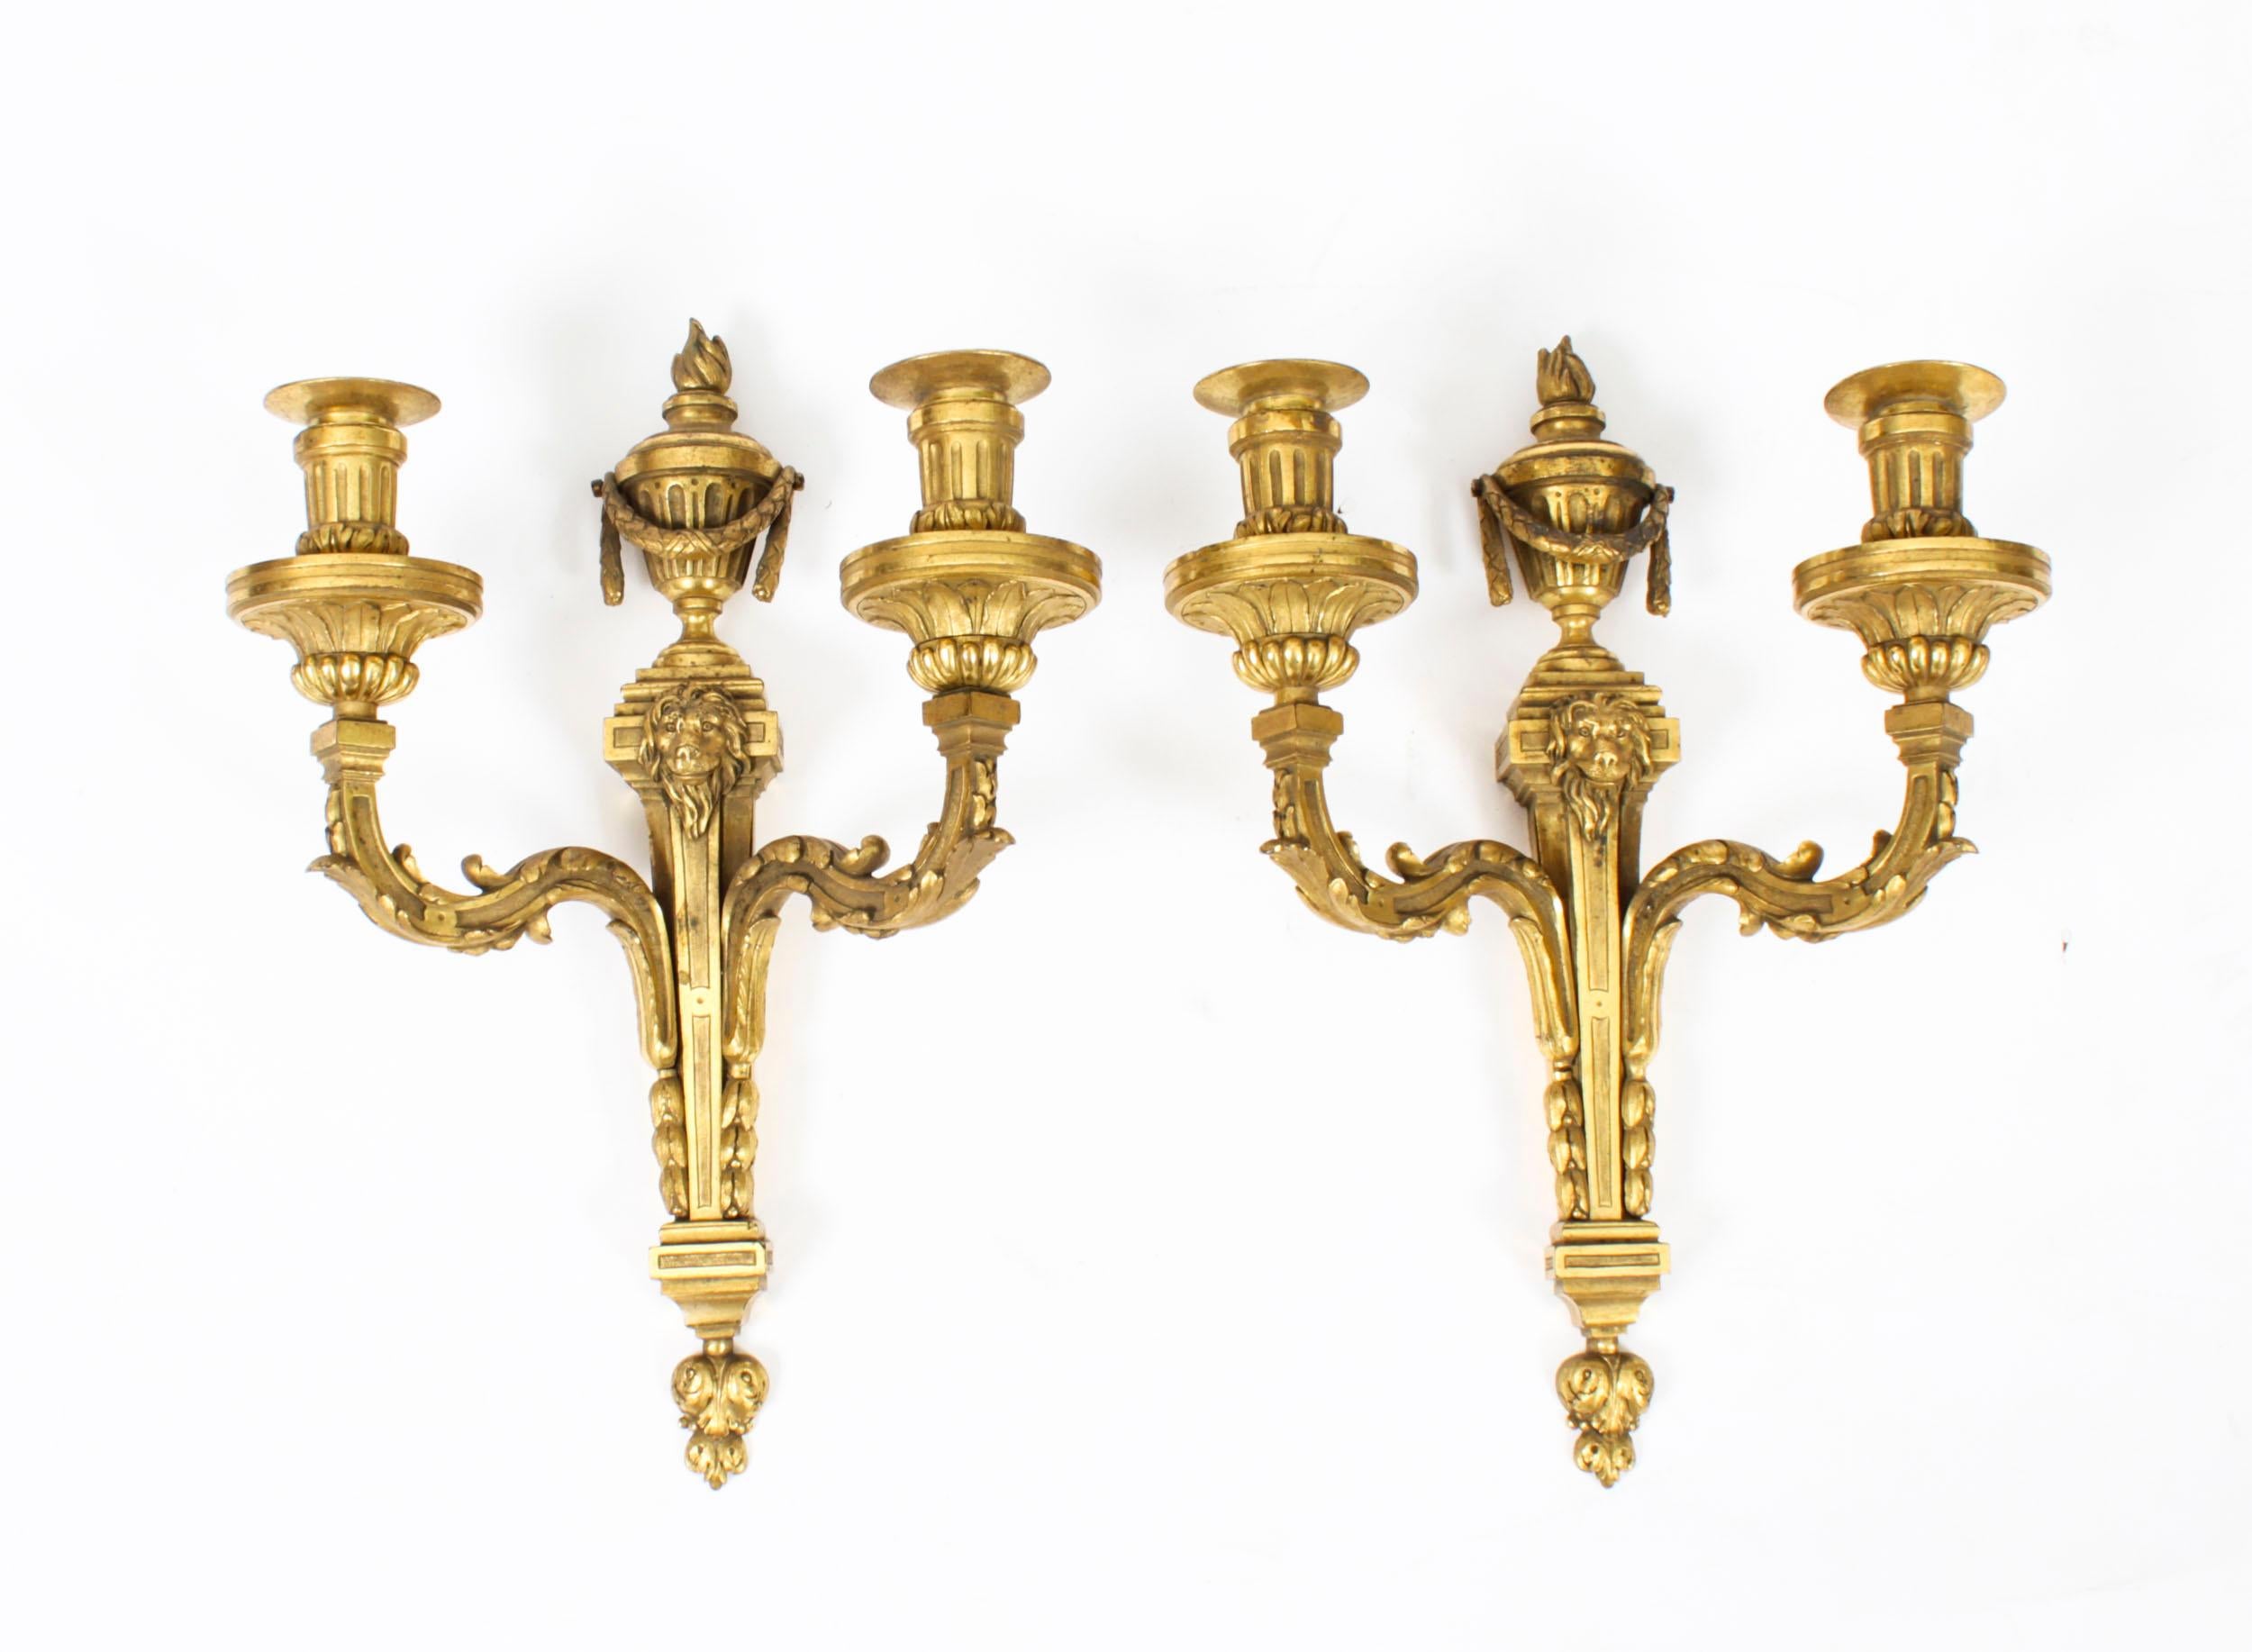 Antique Pair Regency Revival Ormolu Wall Lights Appliques Mid 19th Century For Sale 8